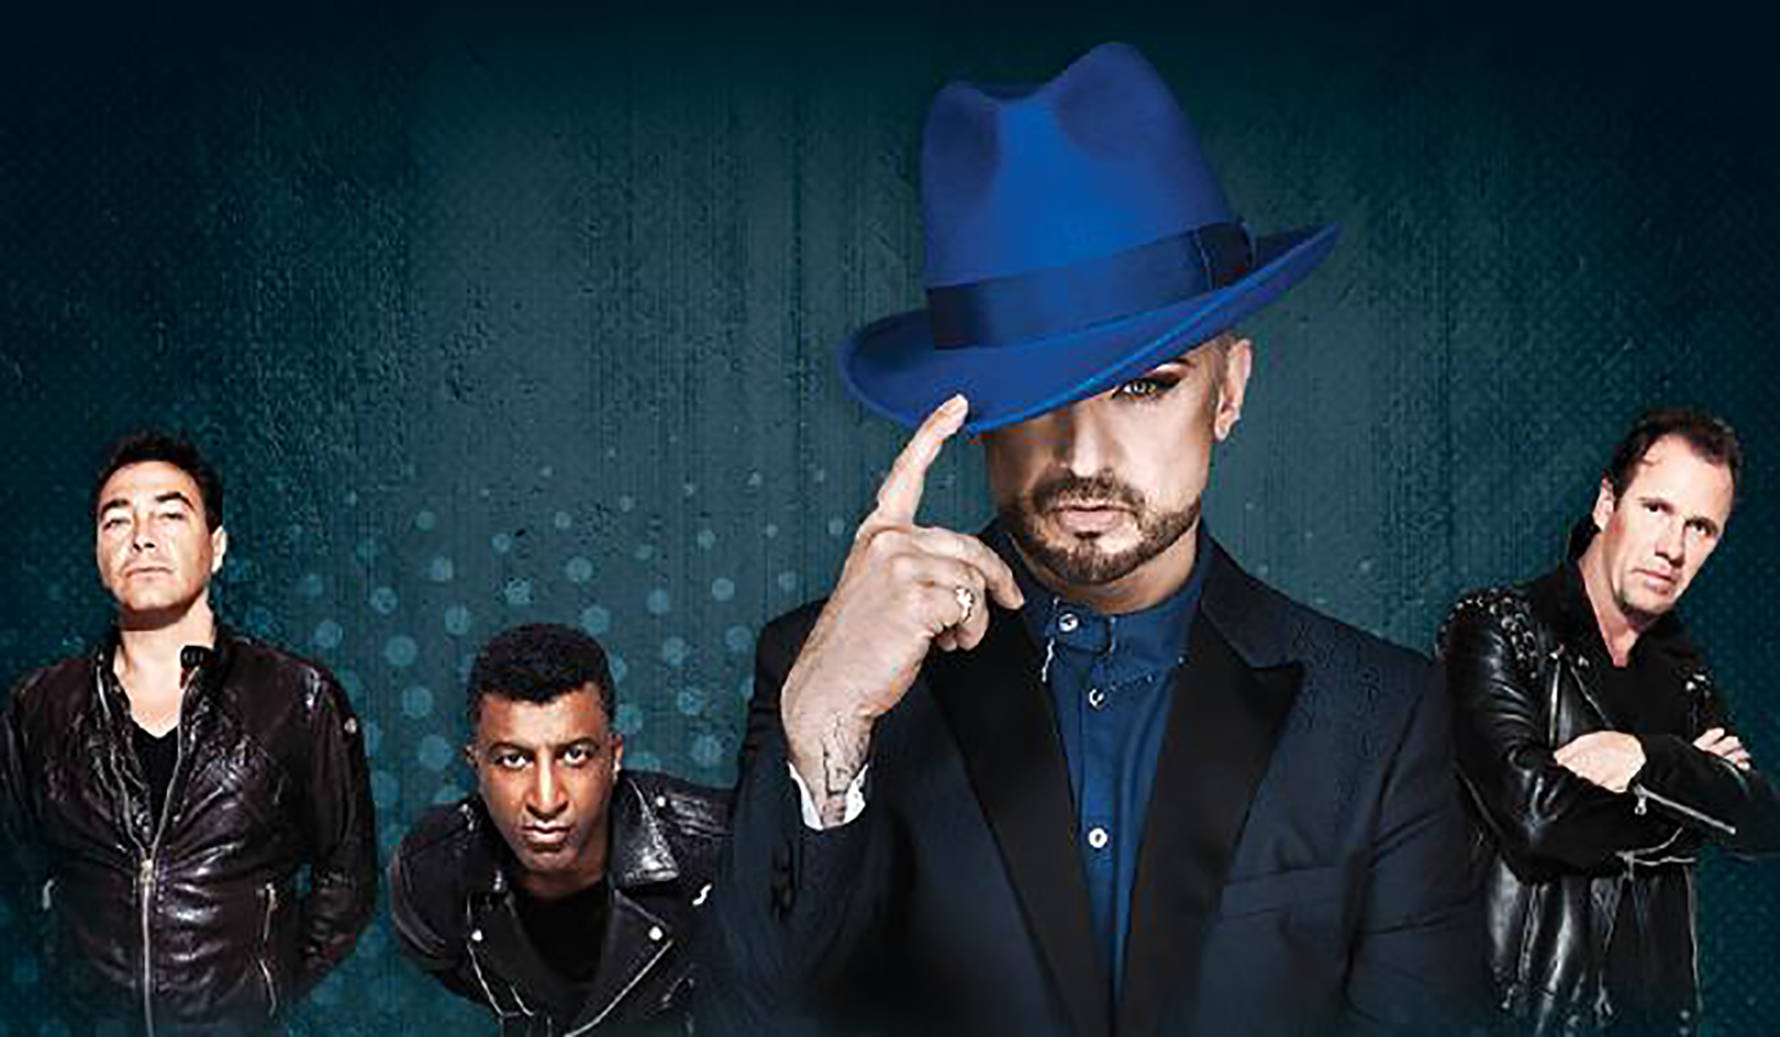 Boy George and Culture Club bring their iconic pop music show to the Washington State Fair on Sept. 13. COURTESY PHOTO